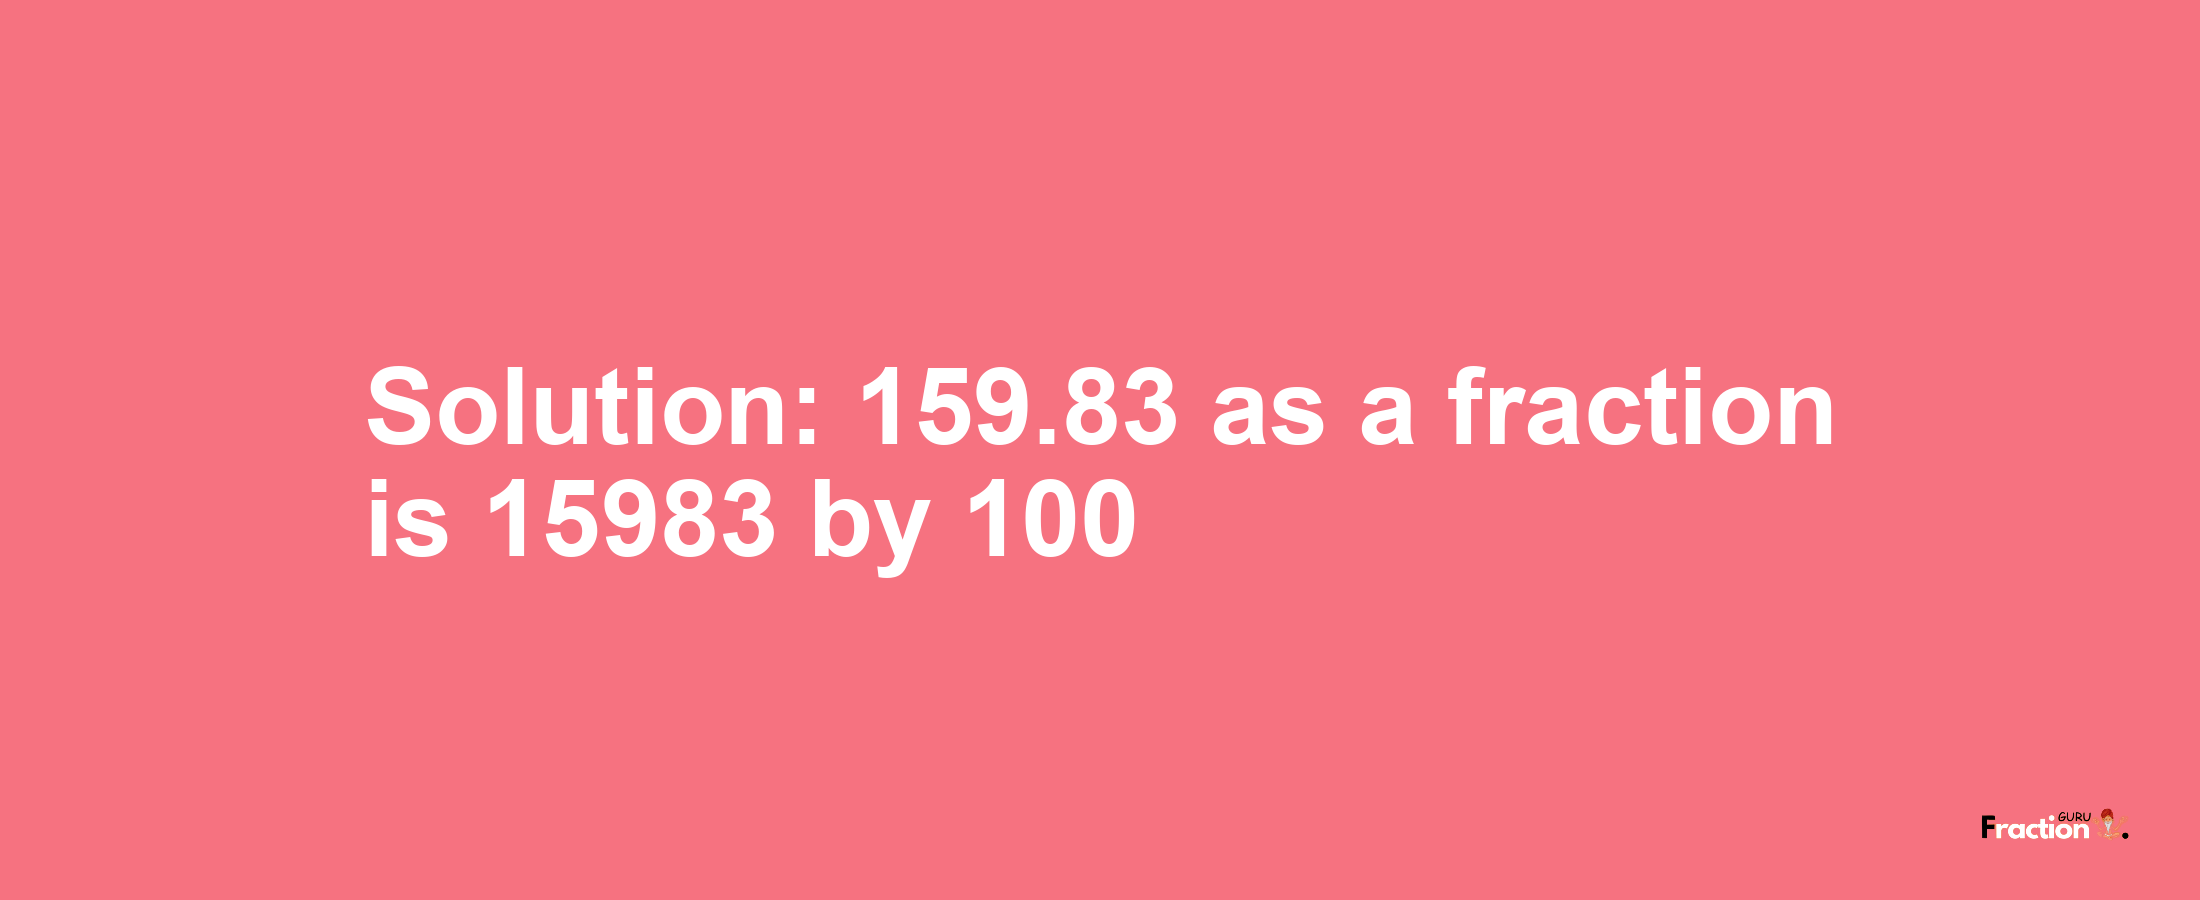 Solution:159.83 as a fraction is 15983/100